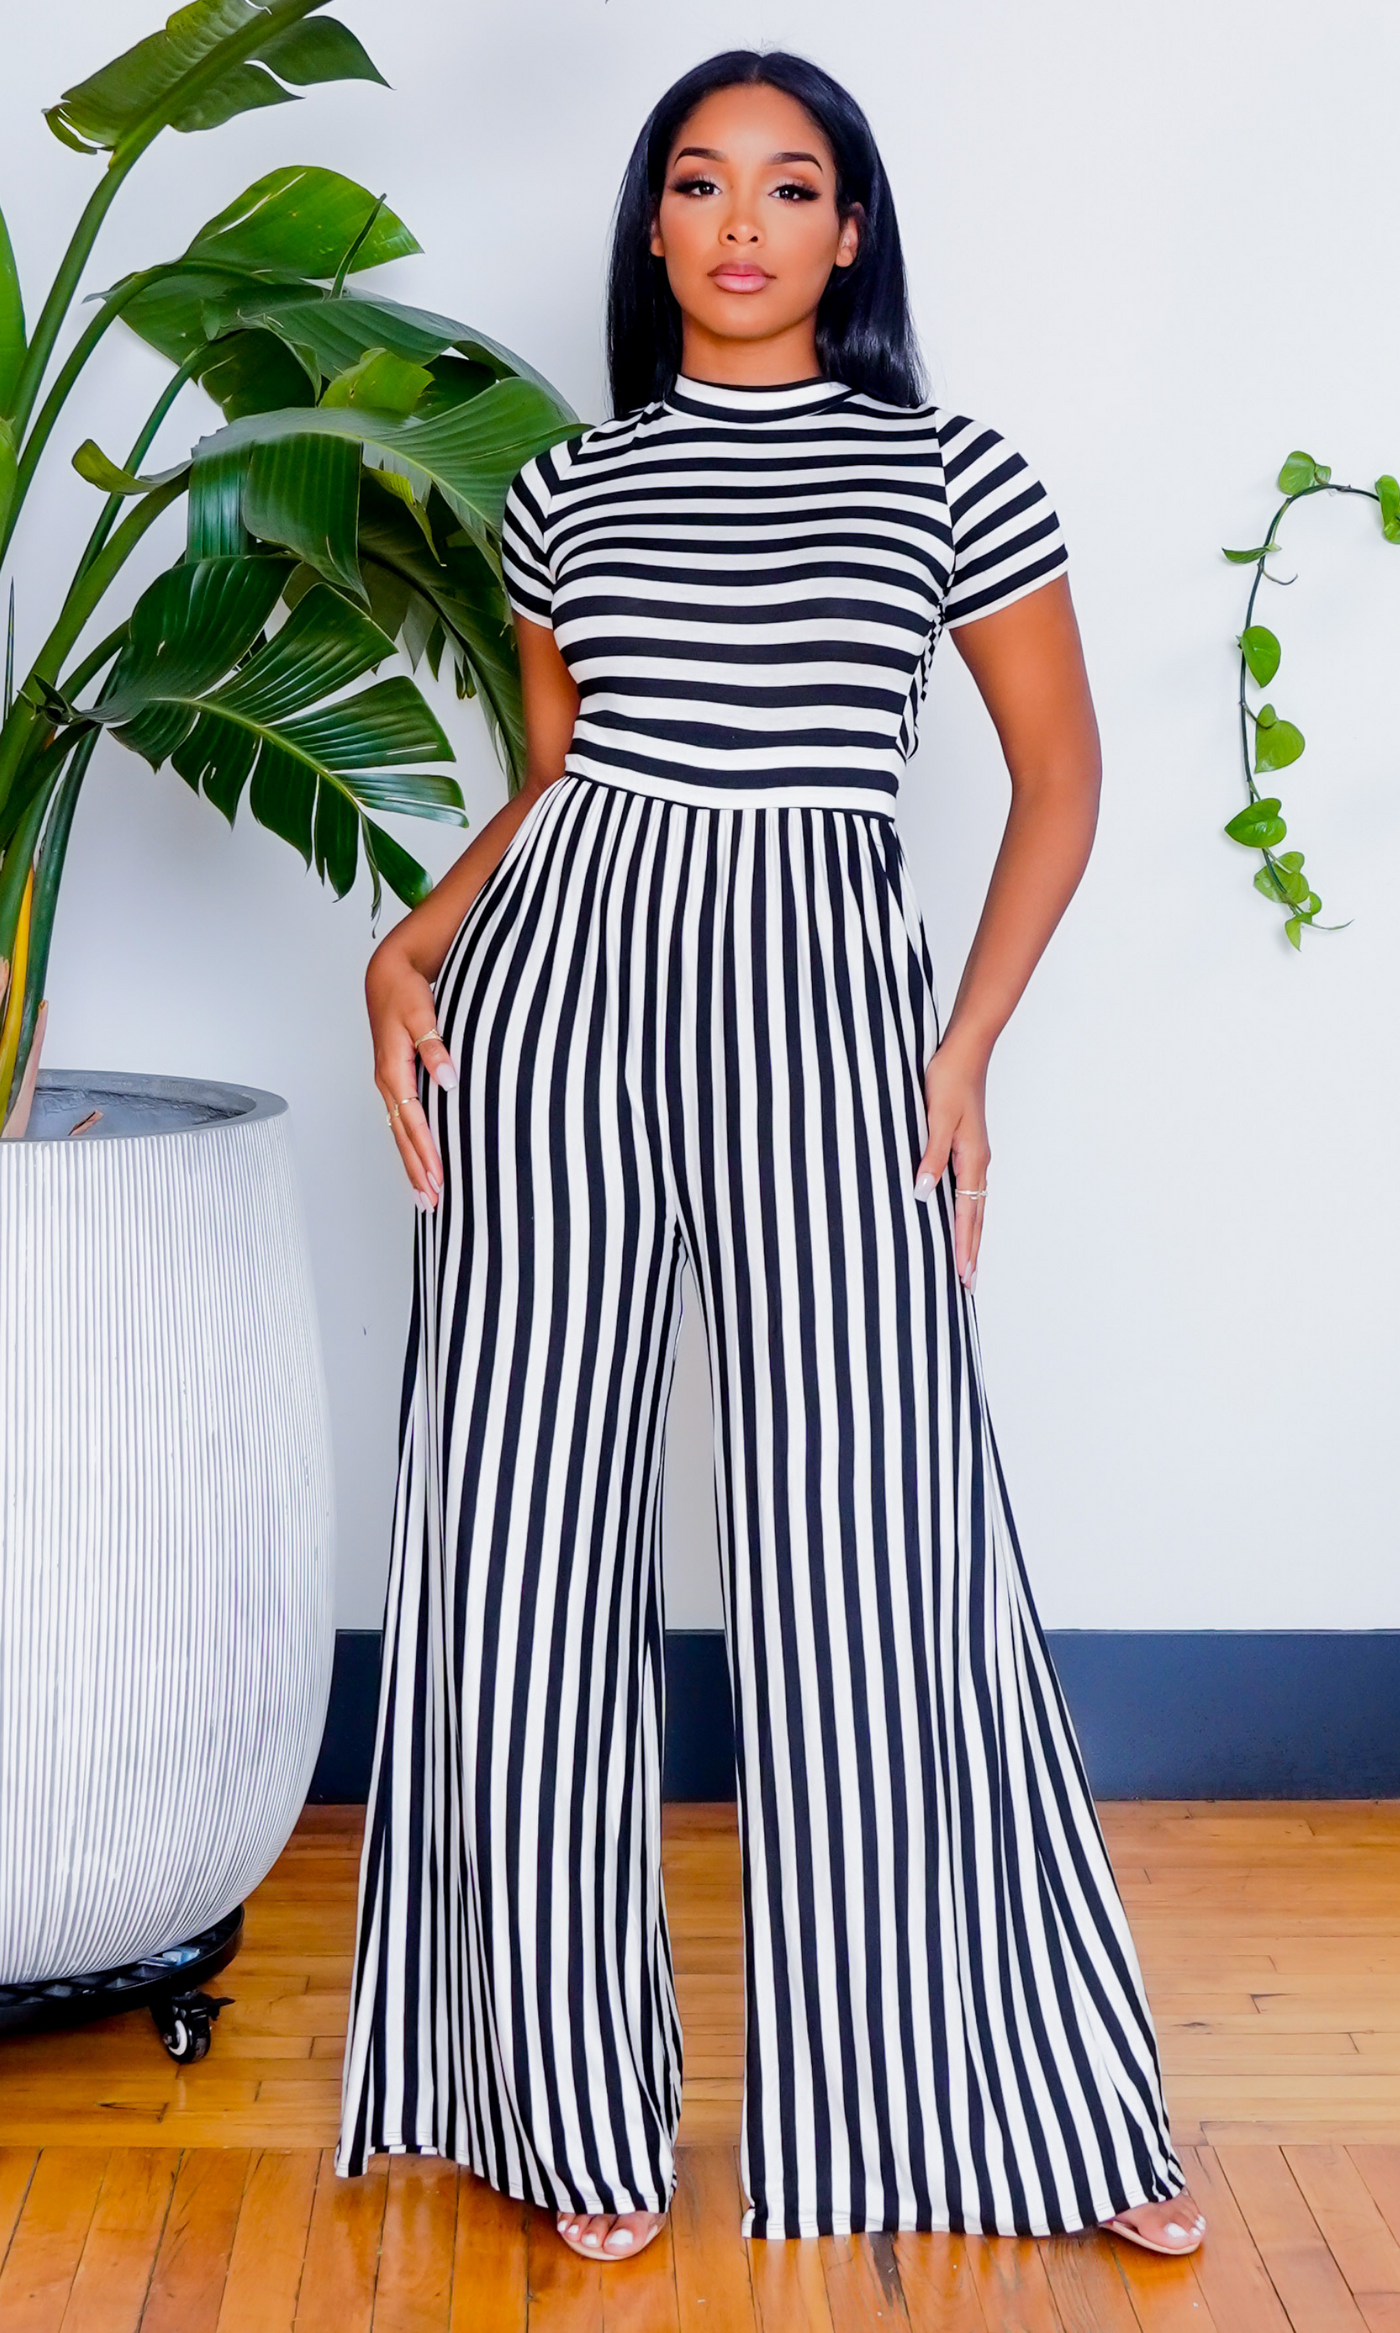 Eye Catching | Open Back Jumpsuit - Black & White - Cutely Covered